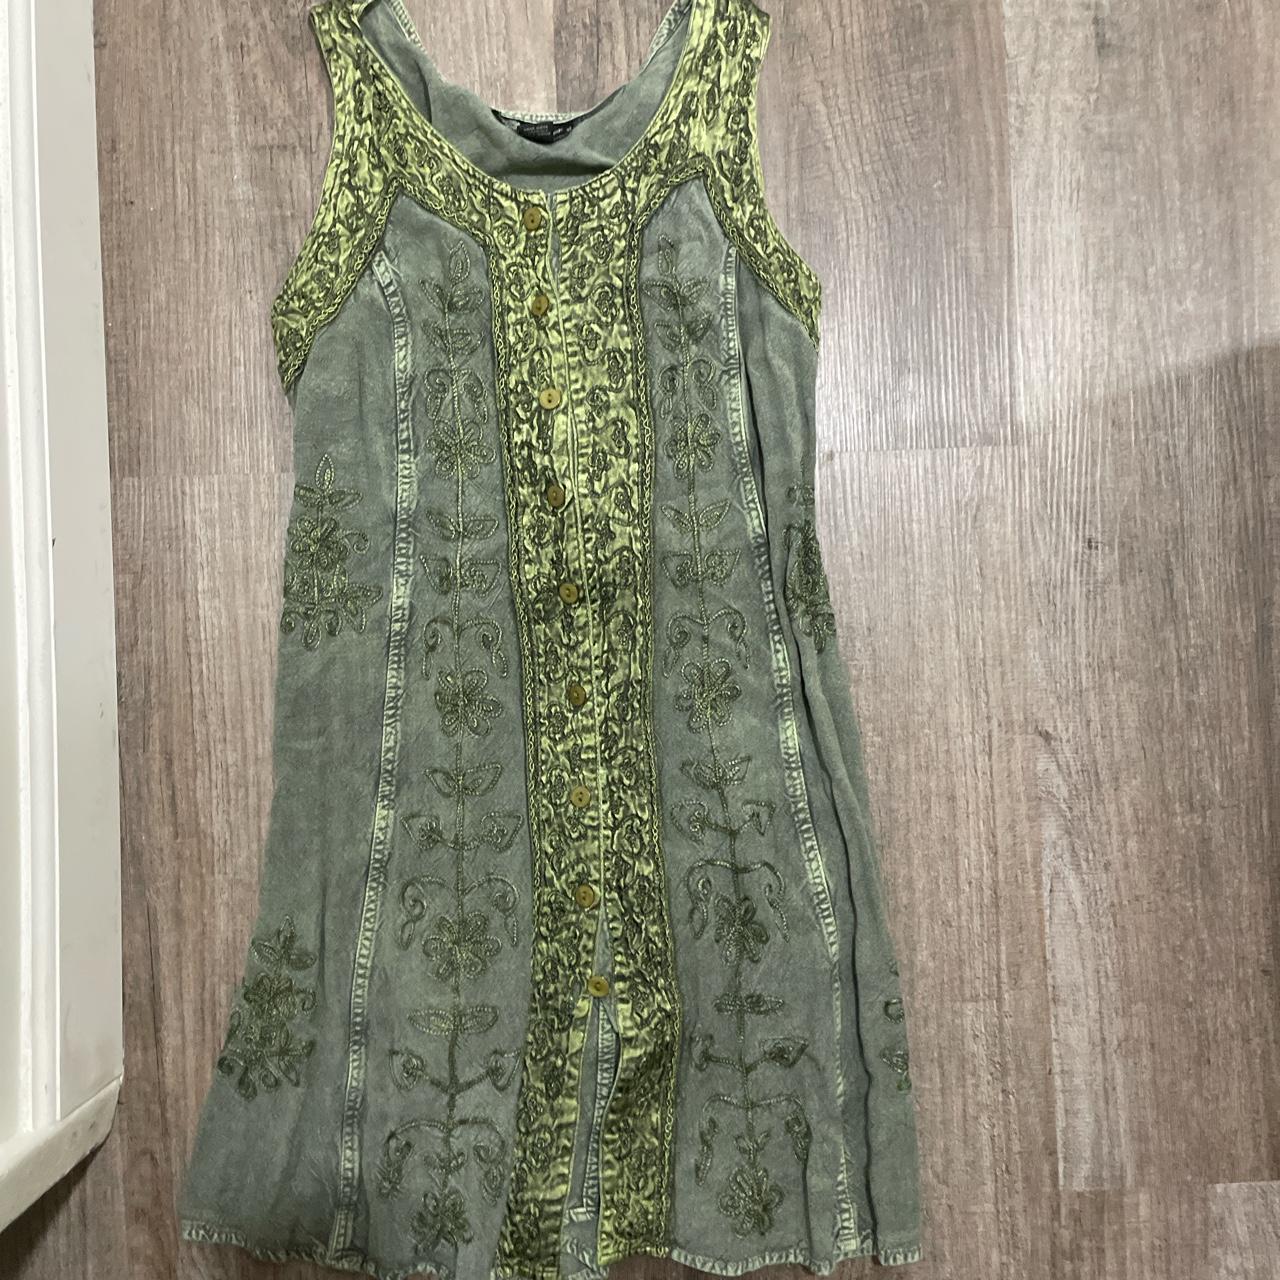 Vintage style green dress Really cute embroidered... - Depop